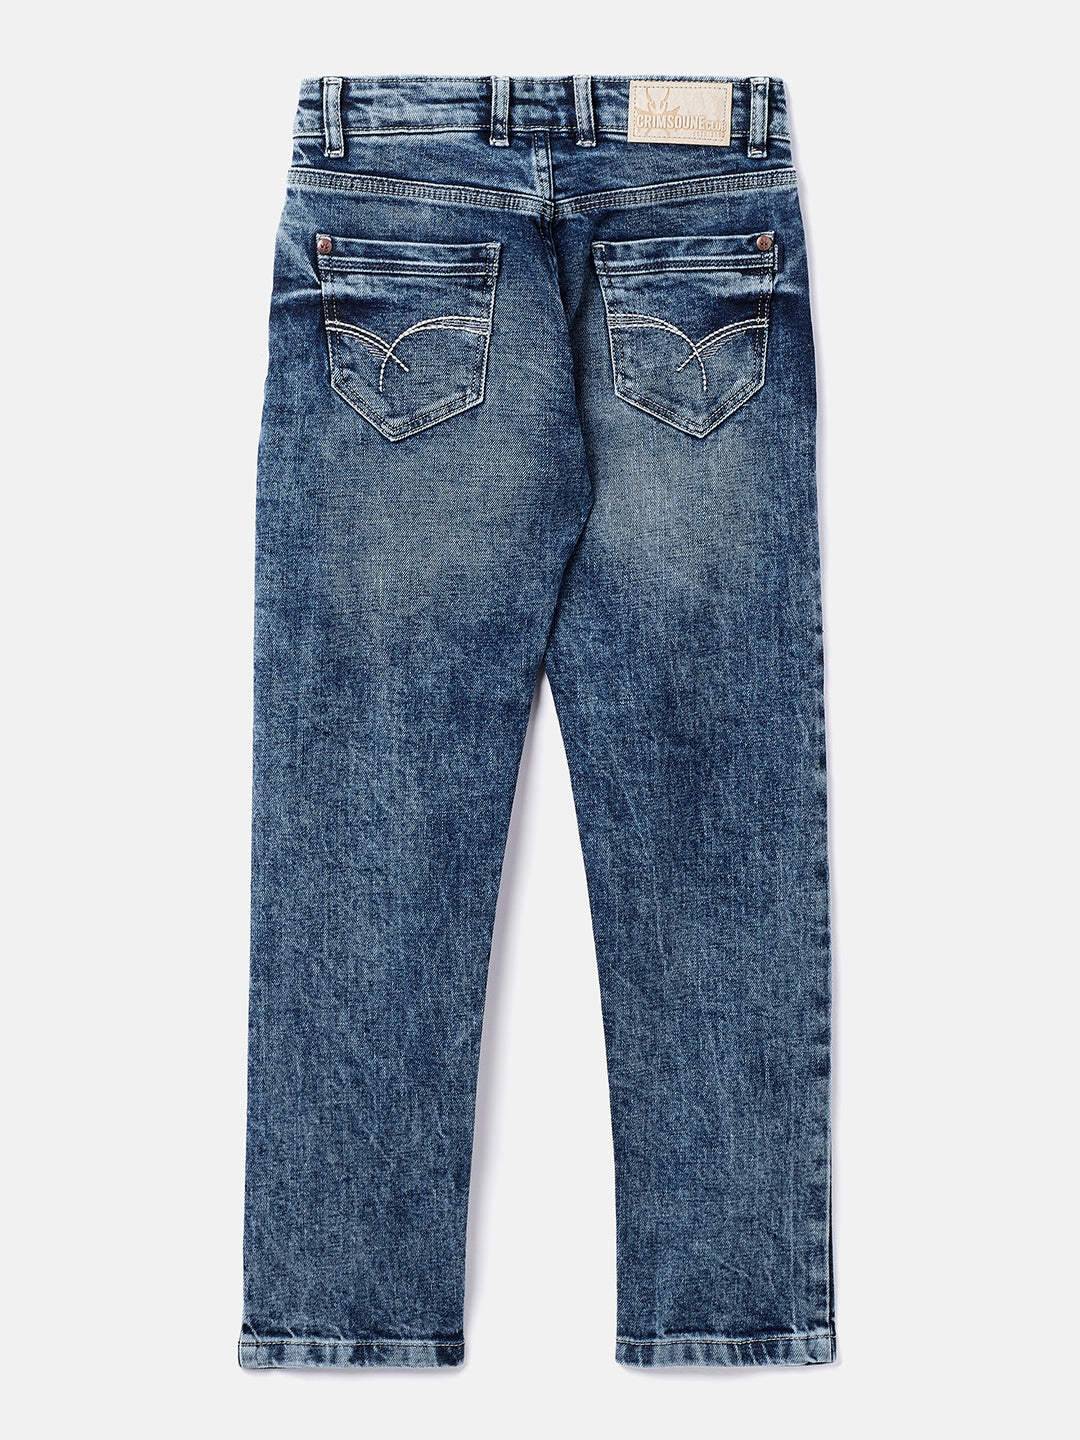 Blue Washed Jeans - Boys Jeans